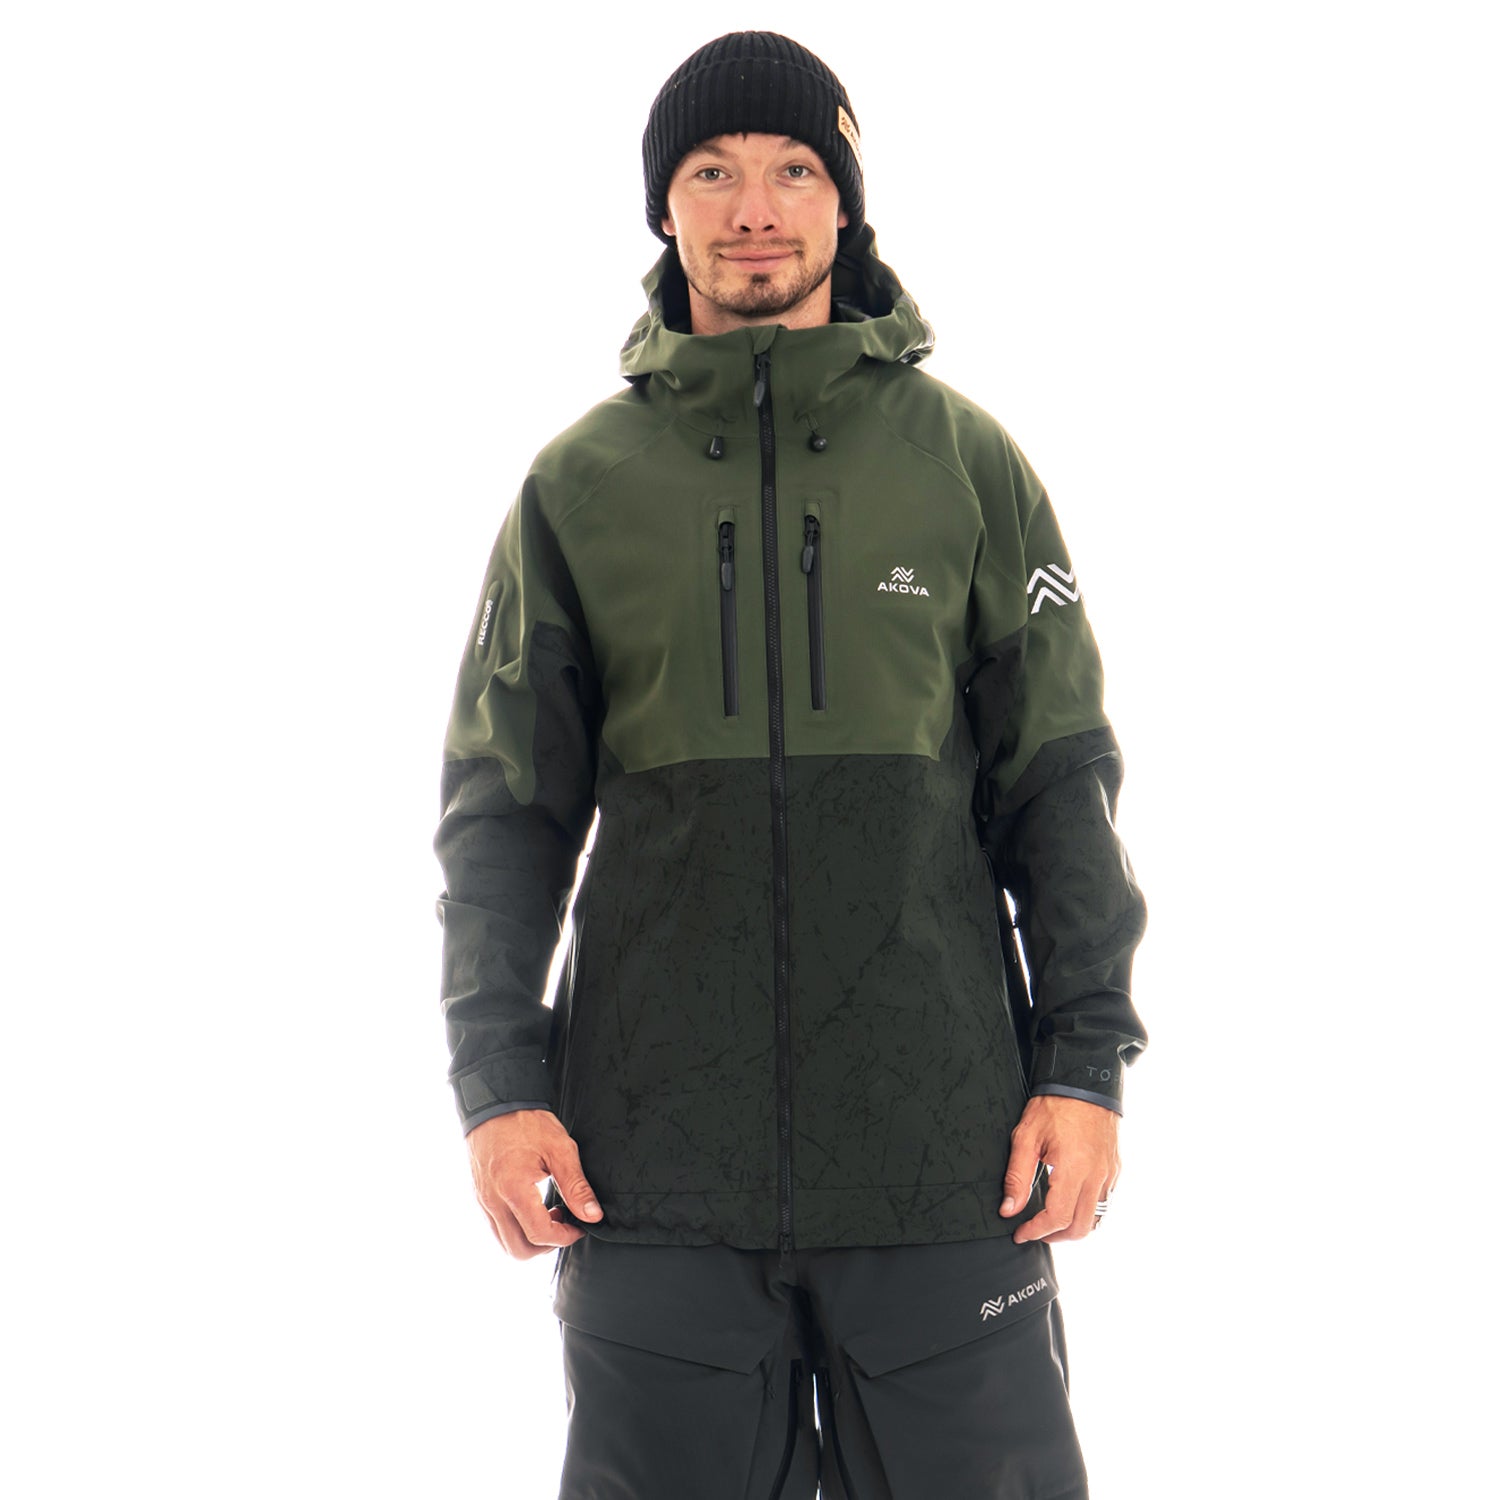 Shop Outdoor Clothing, All Men's Styles, Shred Dog